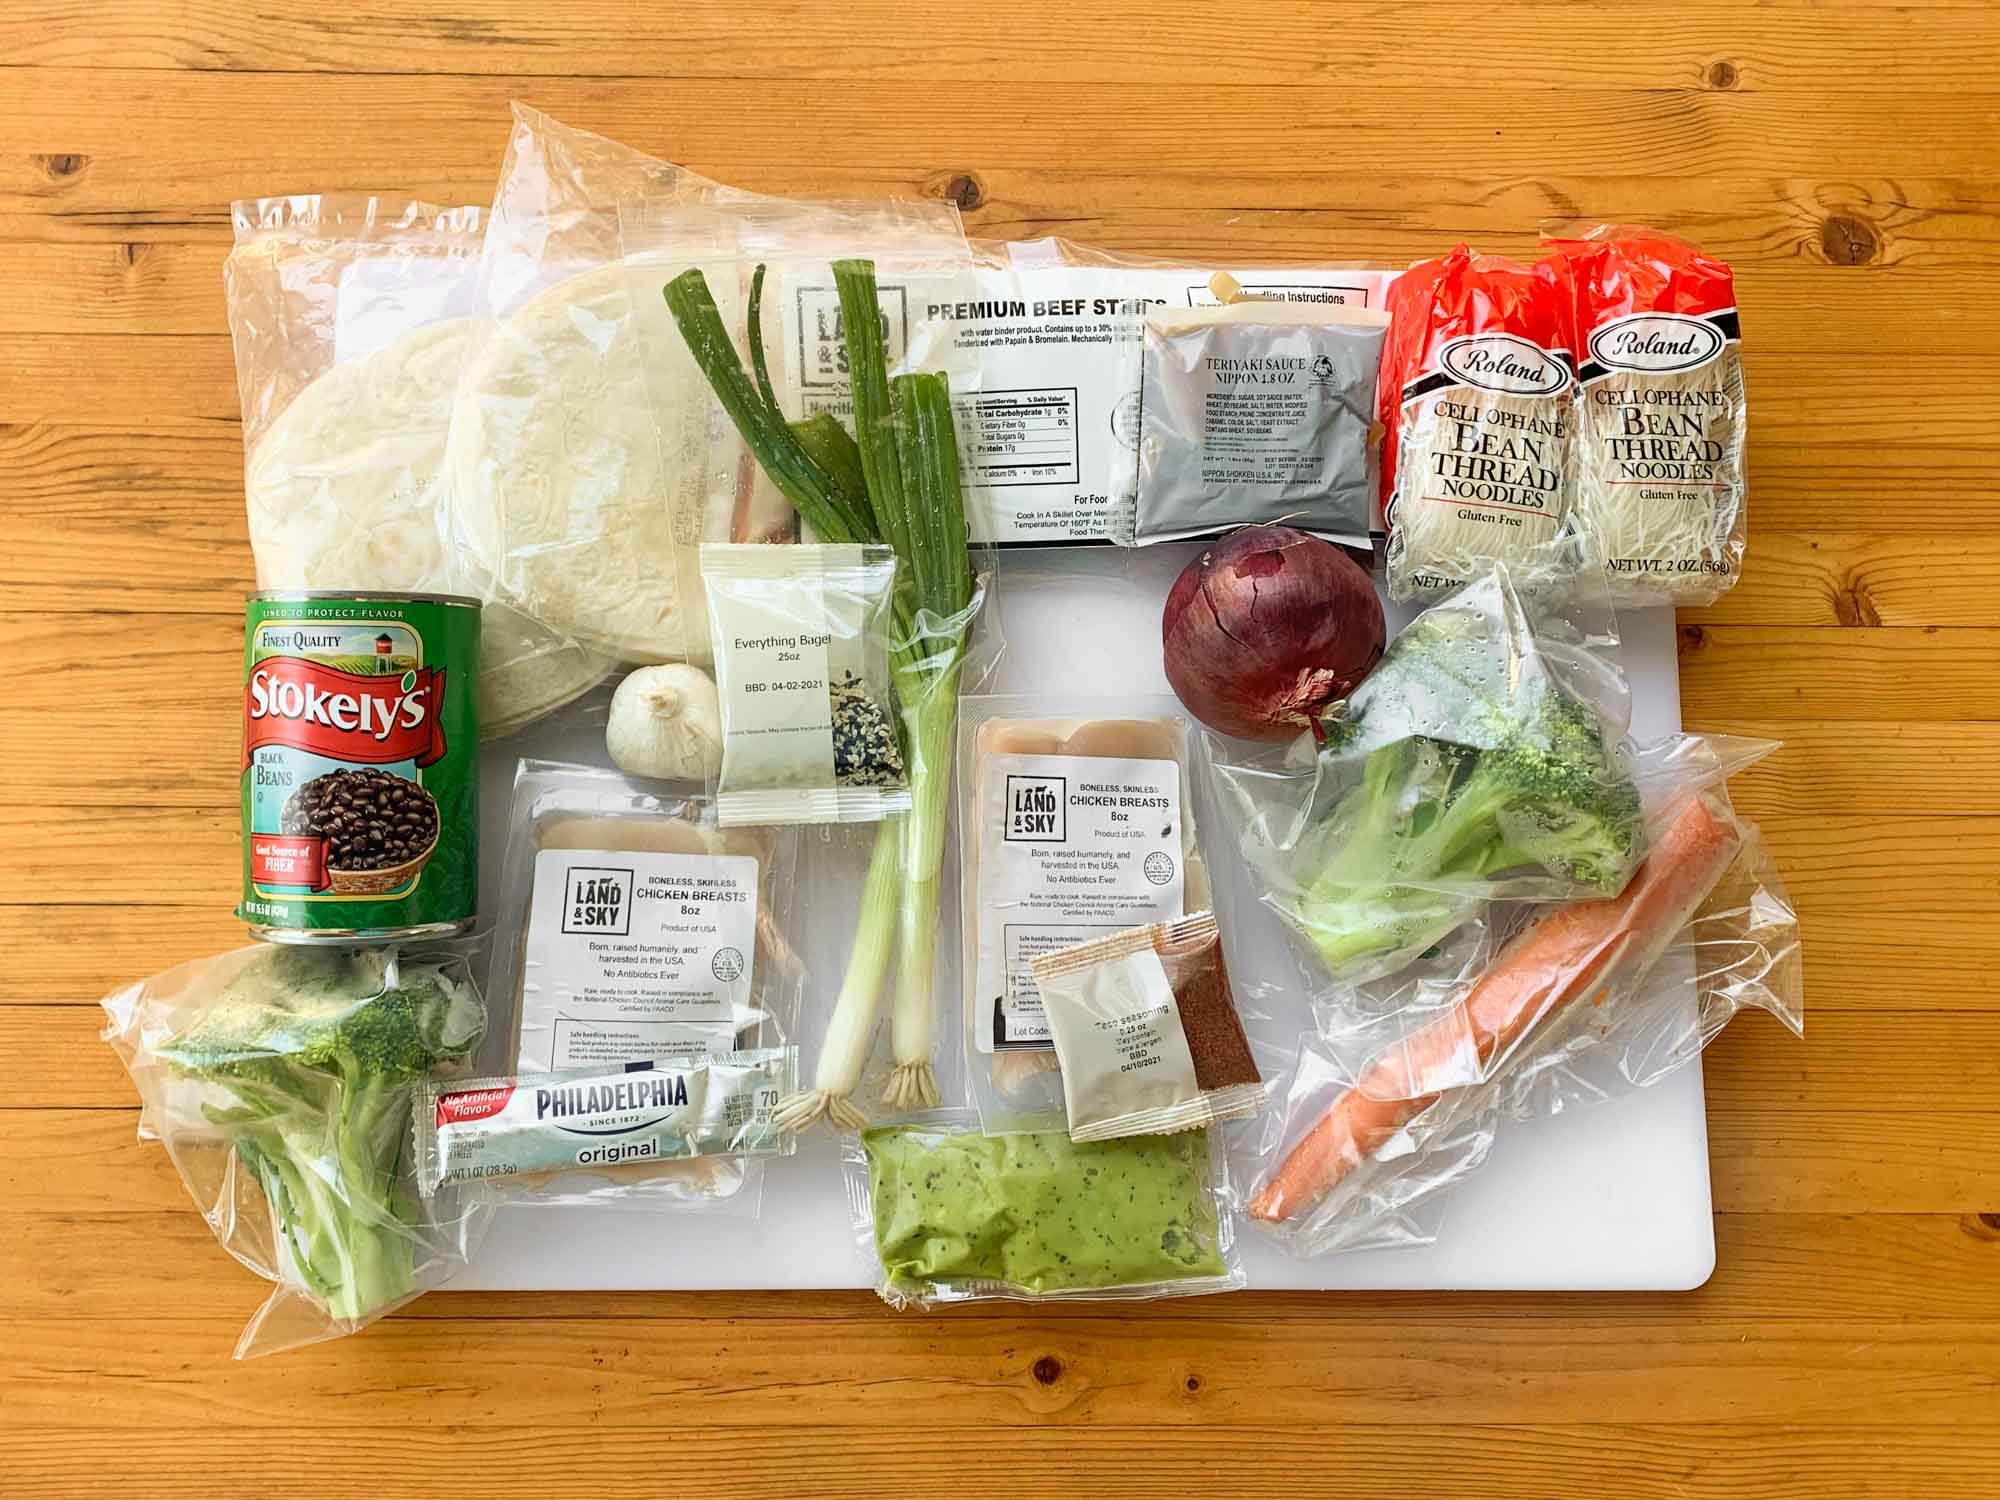 Dinnerly's ingredients, not separated by recipe